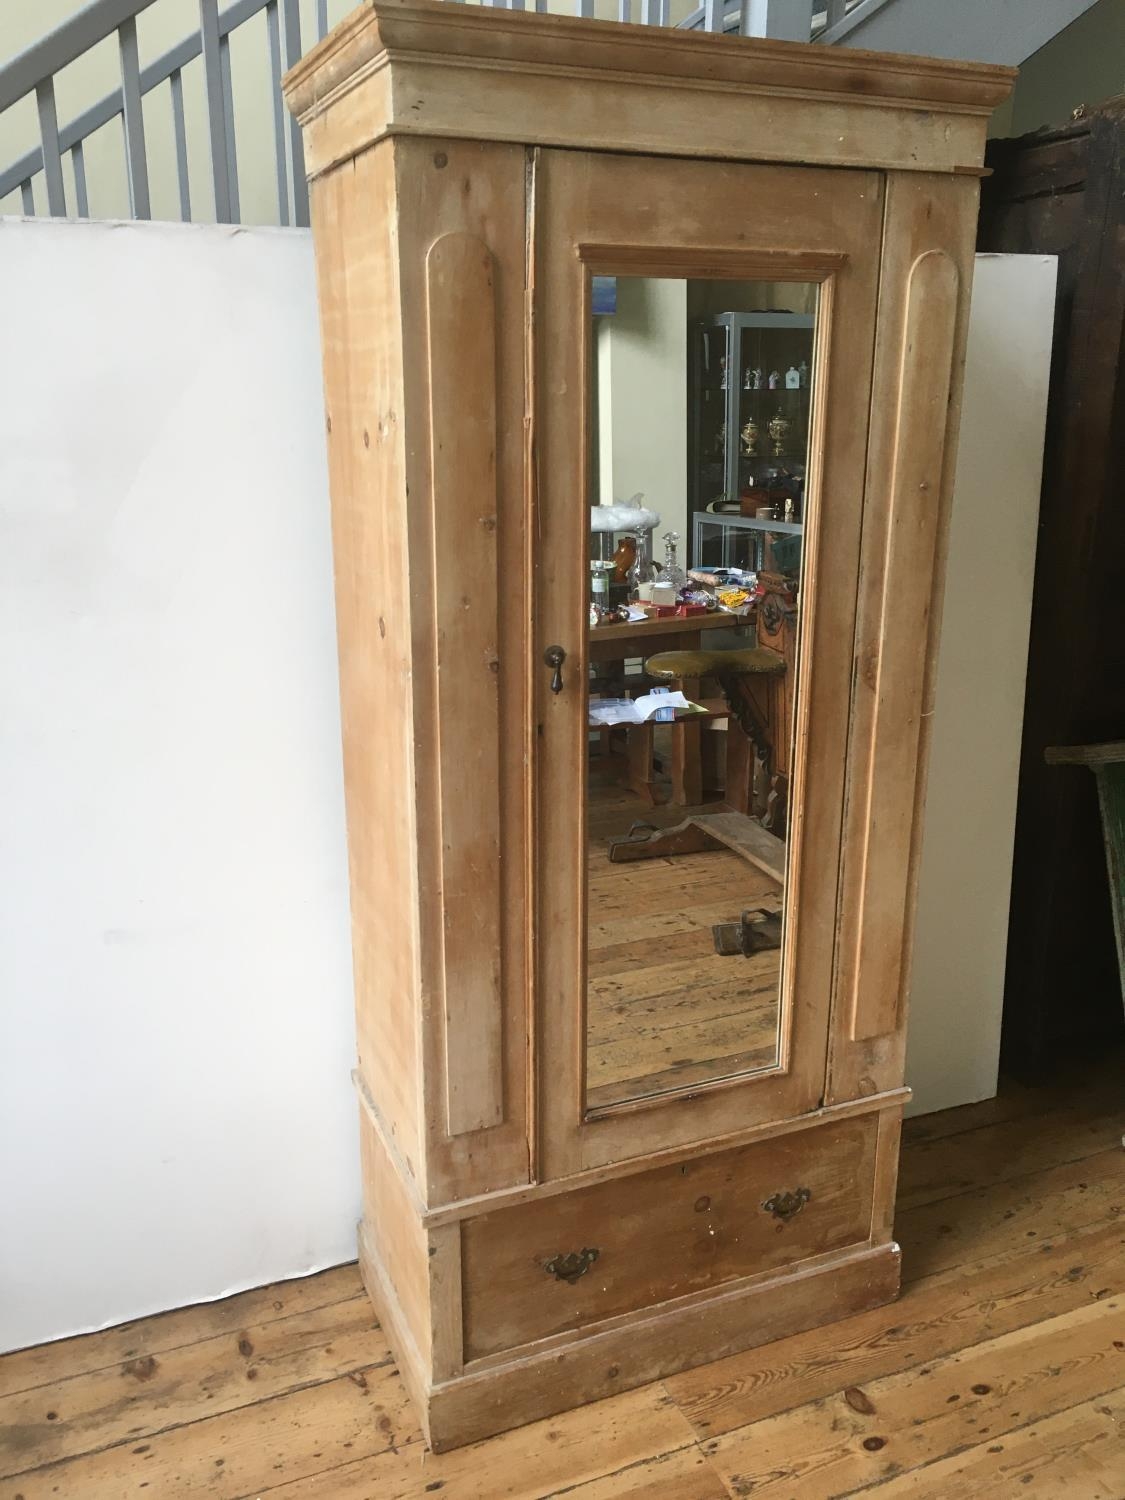 19th CENTURY WAXED PINE SINGLE WARDROBE WITH MIRROR FRONT DOOR AND LINEN DRAWER 202 x 89 x 47cm